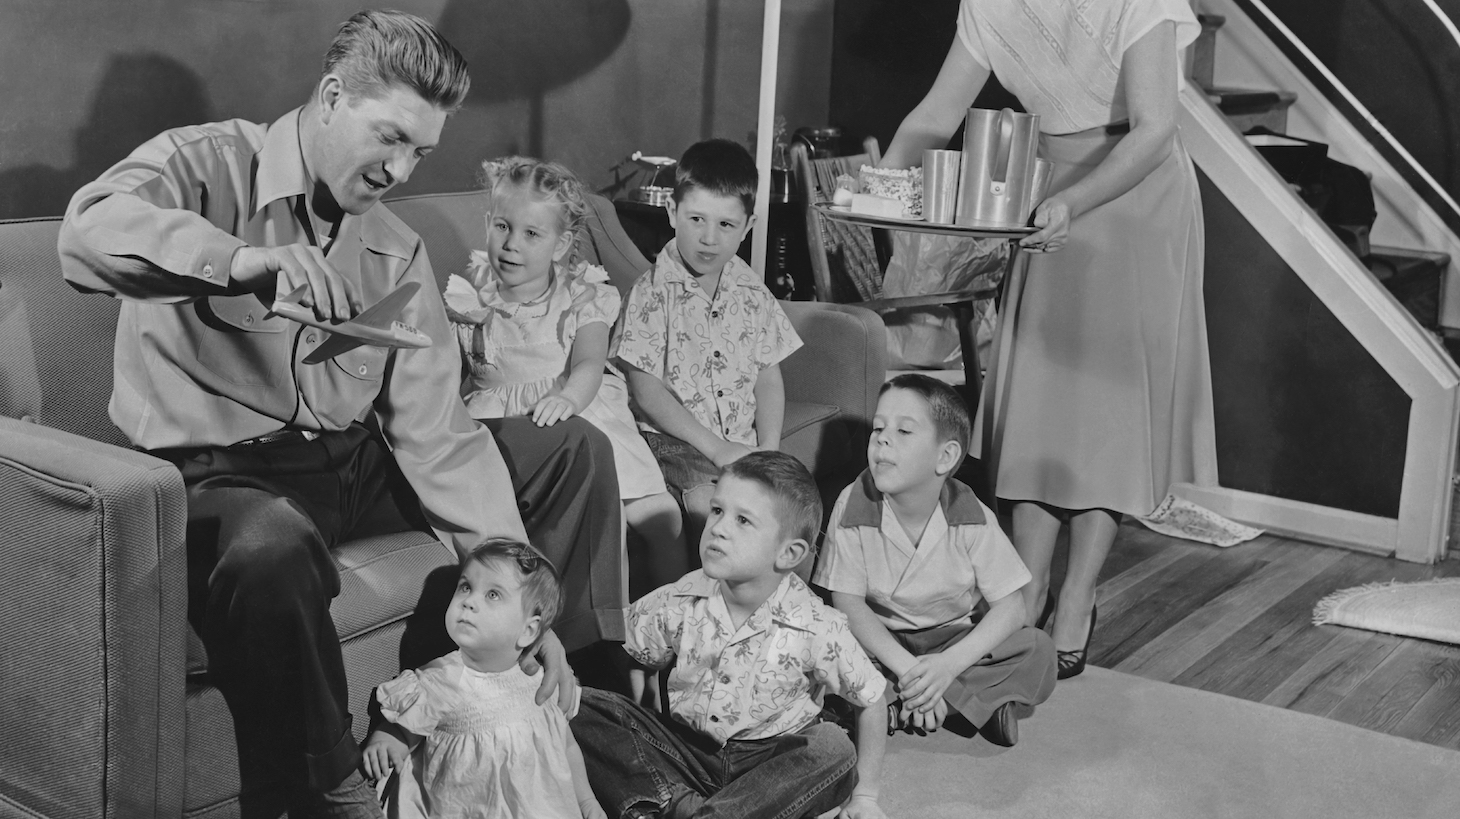 Father entertains five children with a toy airplane as mother carries in a tray of food circa 1950. (Photo by FPG/Getty Images)